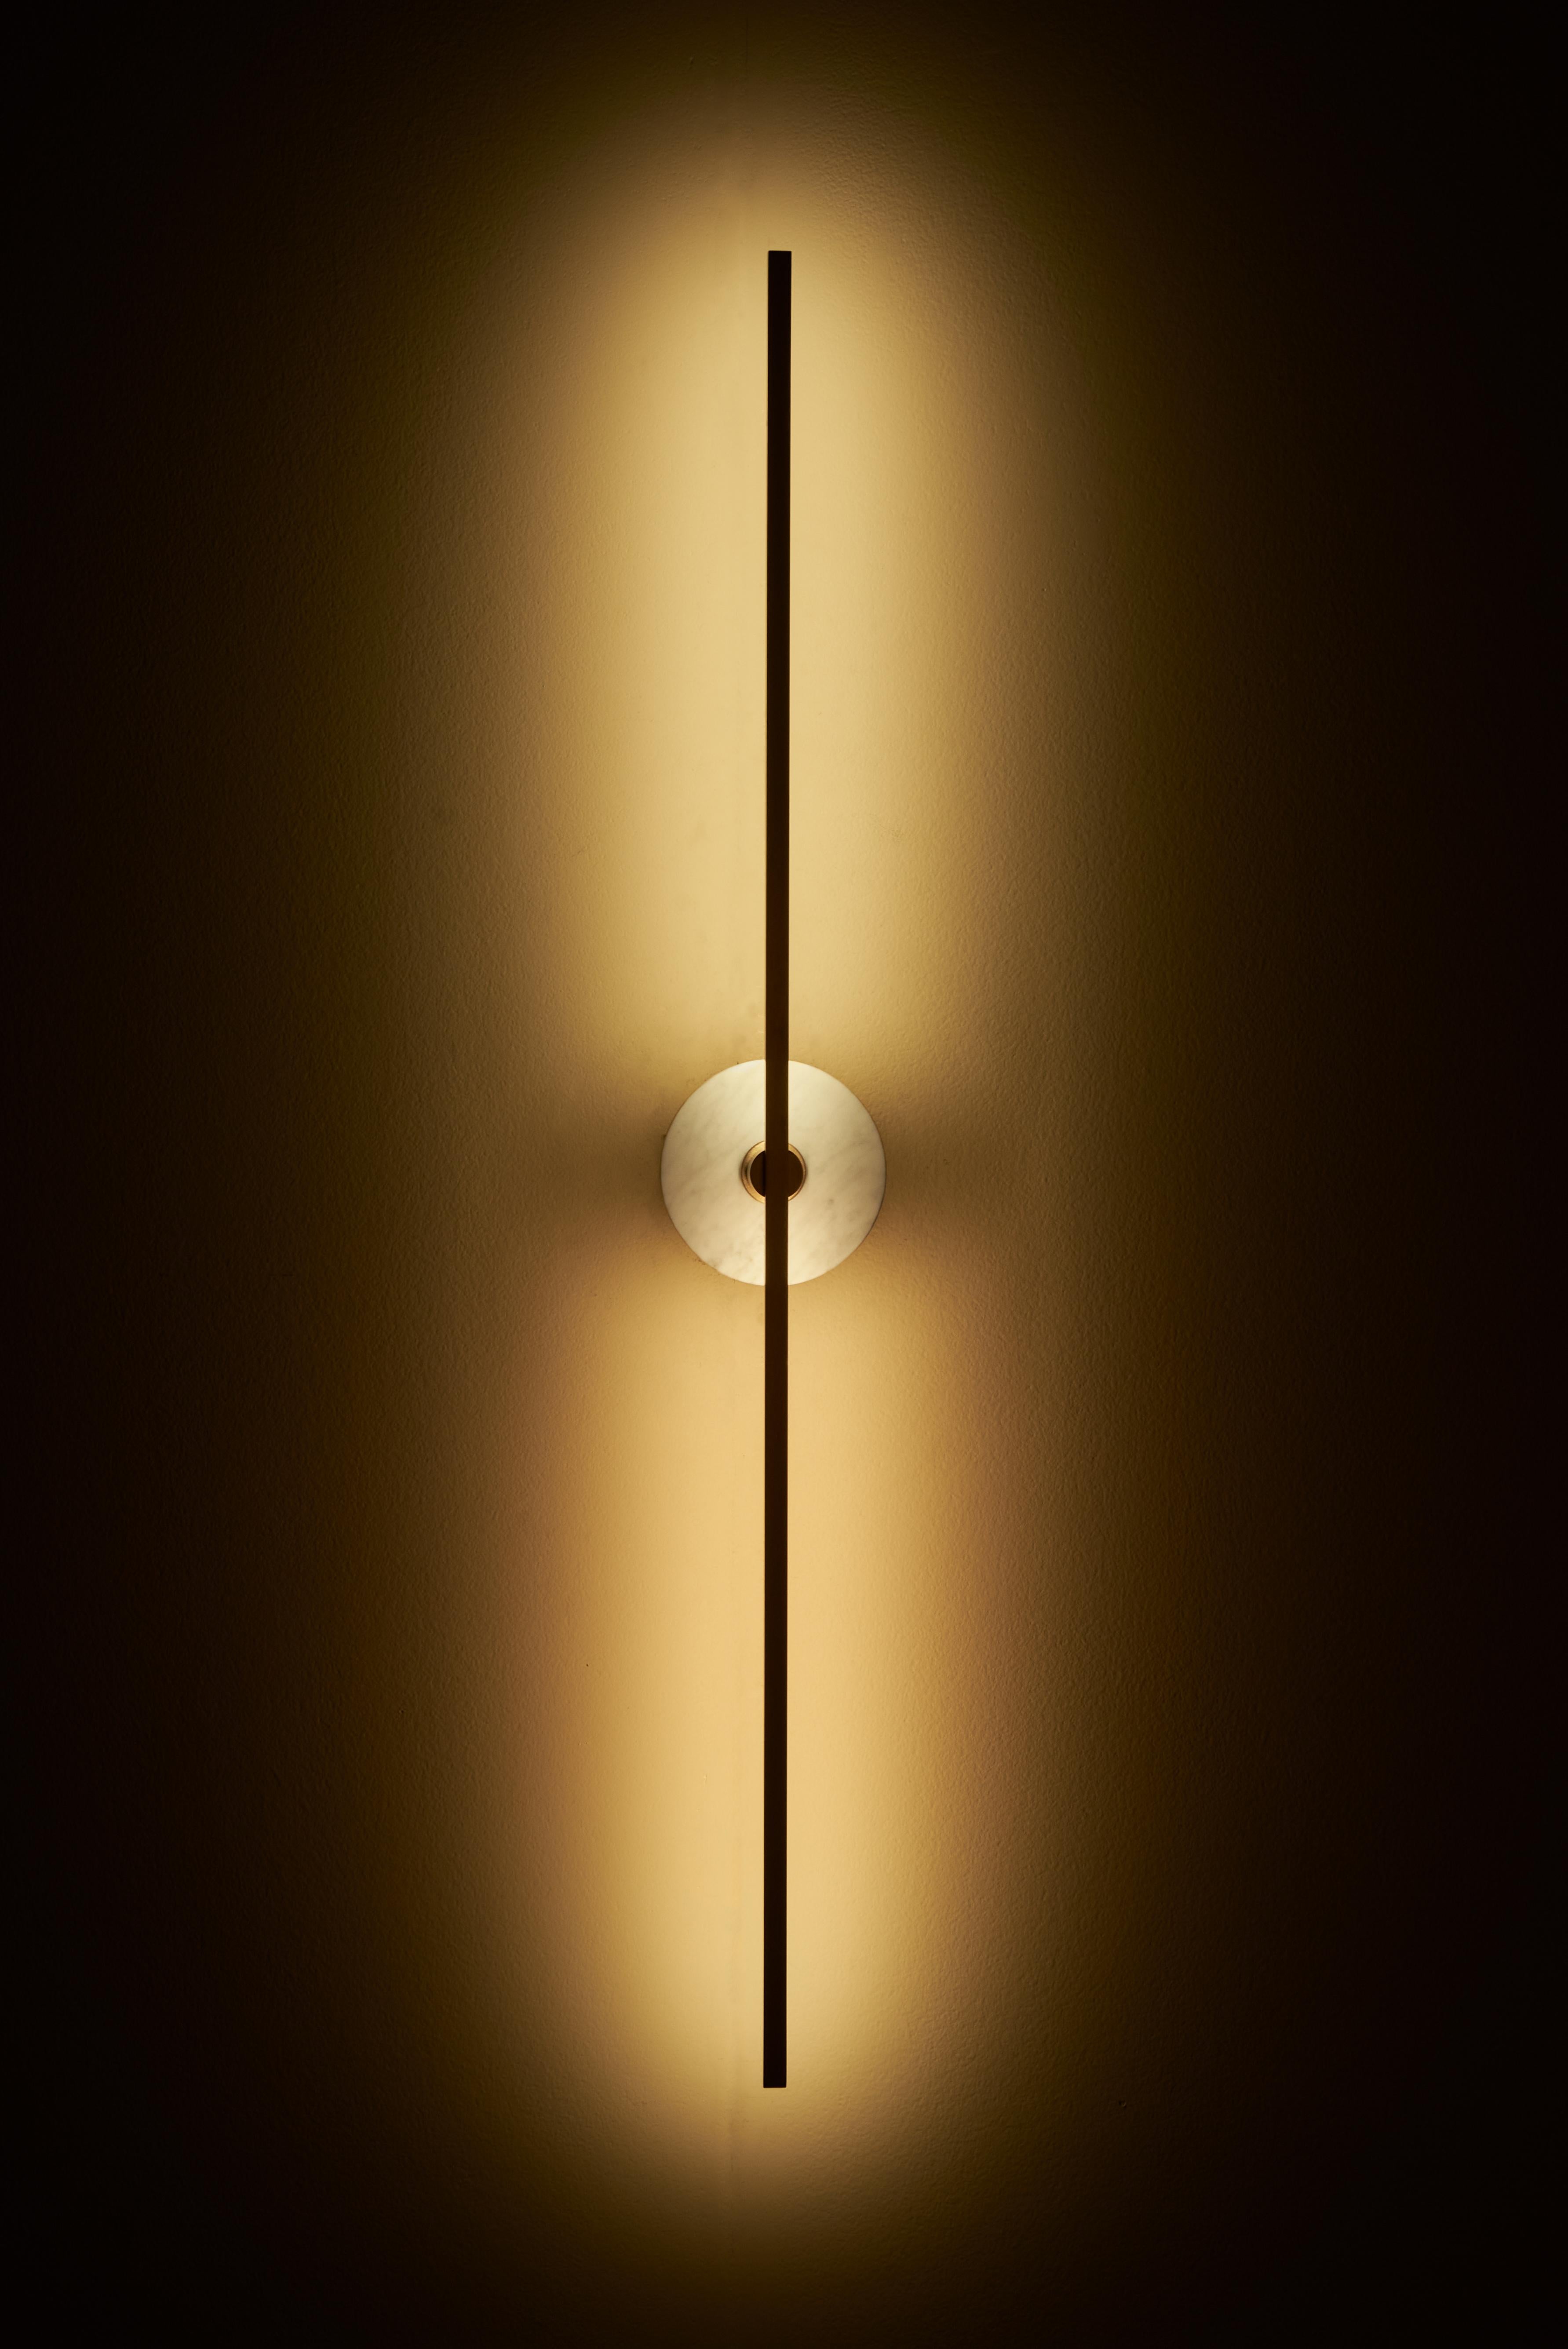 The Grand stick wall sconce is a contemporary lighting fixture that features a Minimalist design with thin brass profiles and advanced LED technology. It emits a warm and diffused light that adds a cozy and inviting atmosphere to any room.

The